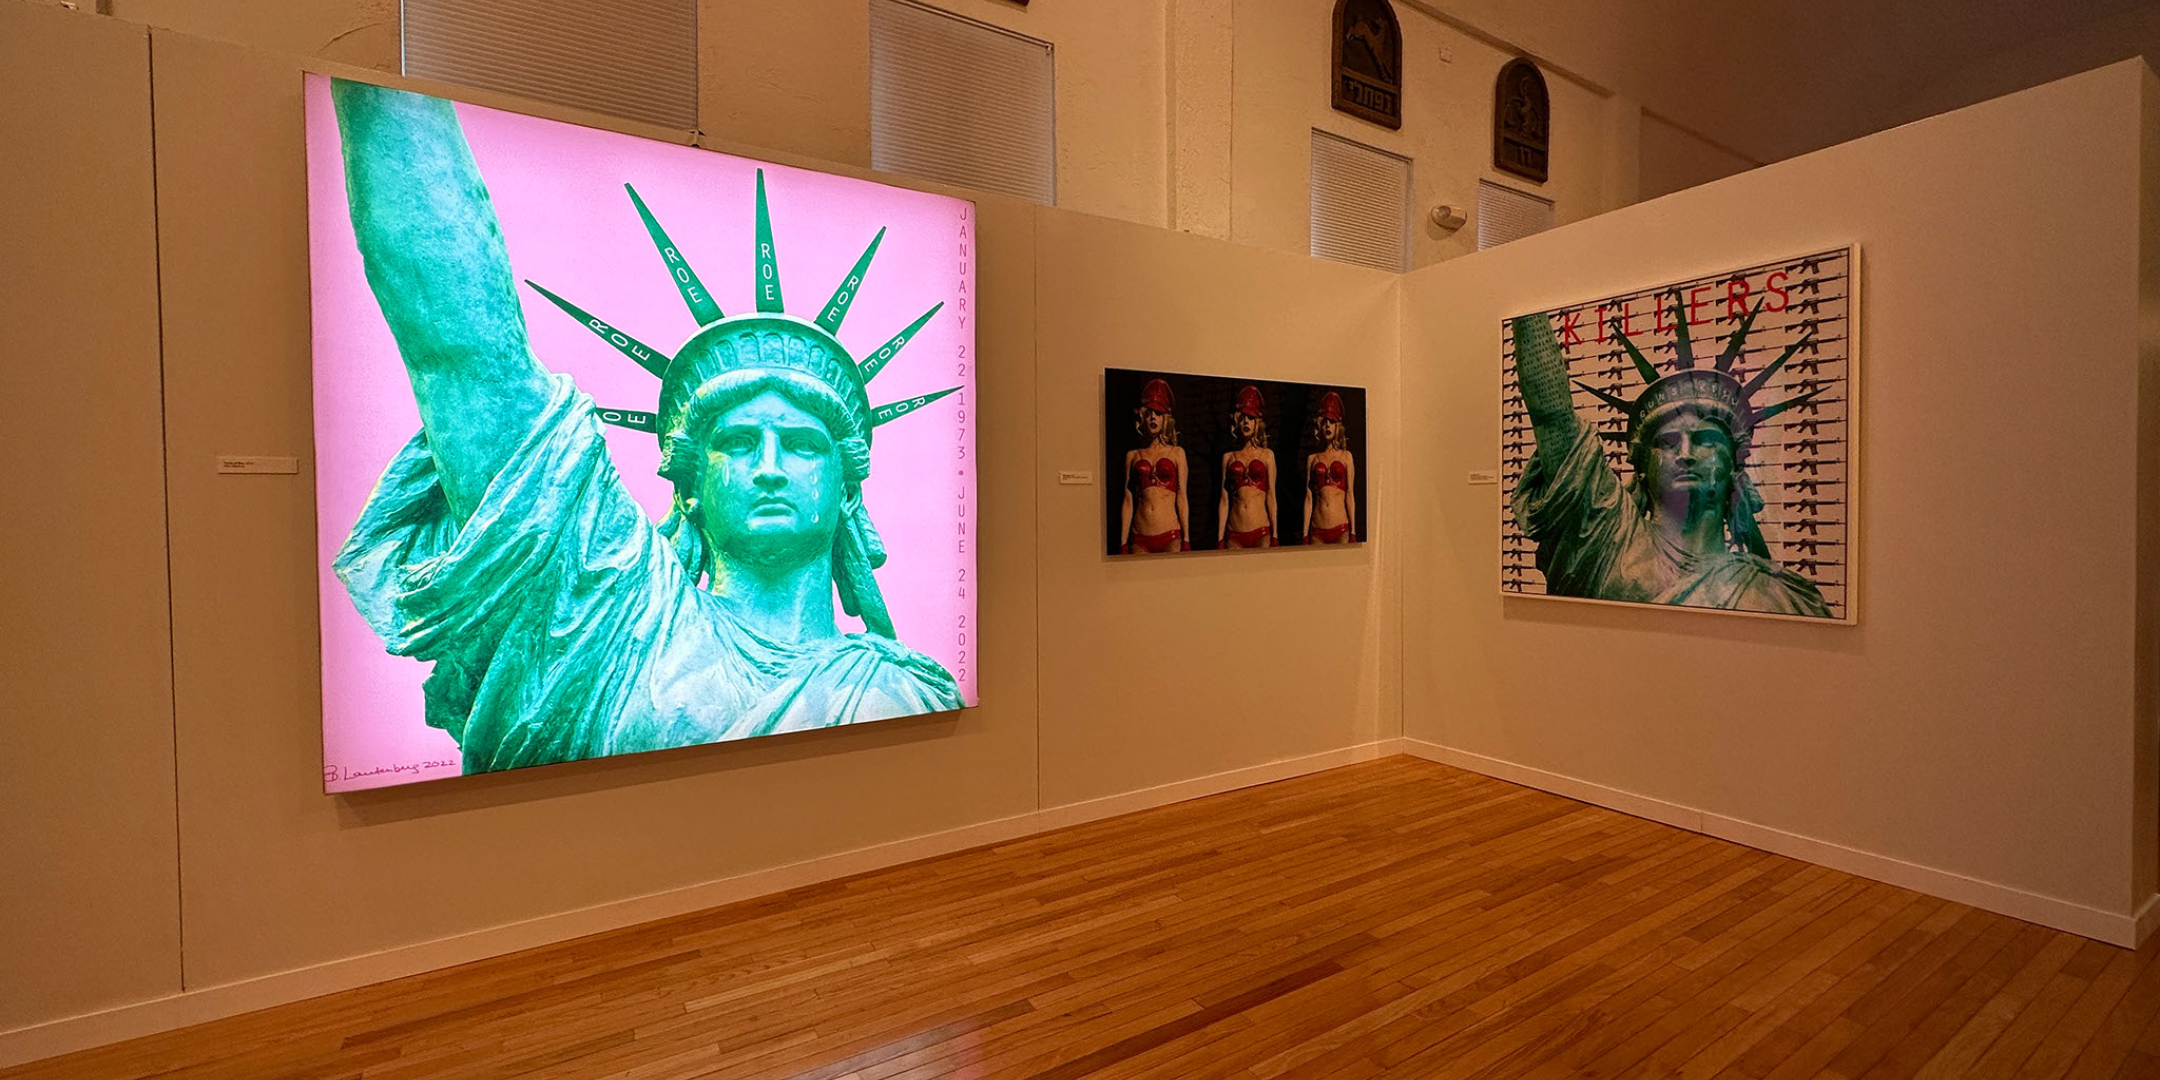 Image of Statue of Liberty on Museum Wall, along with two other art works.